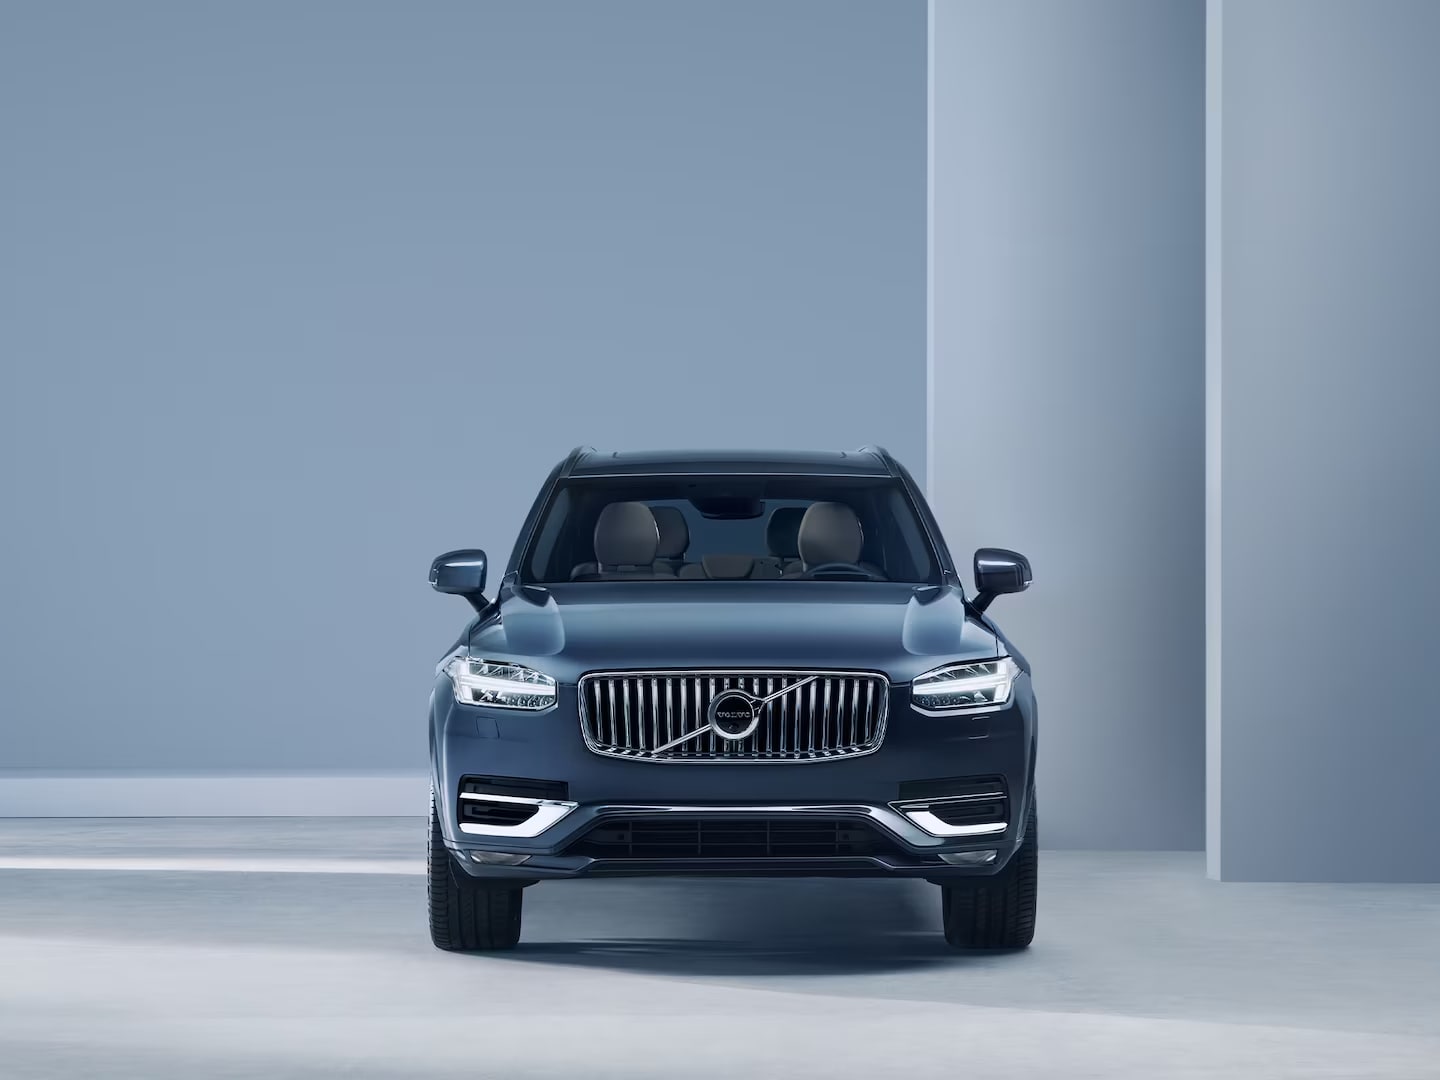 Front exterior of the Volvo XC90 with the iconic front grille and headlamp design.